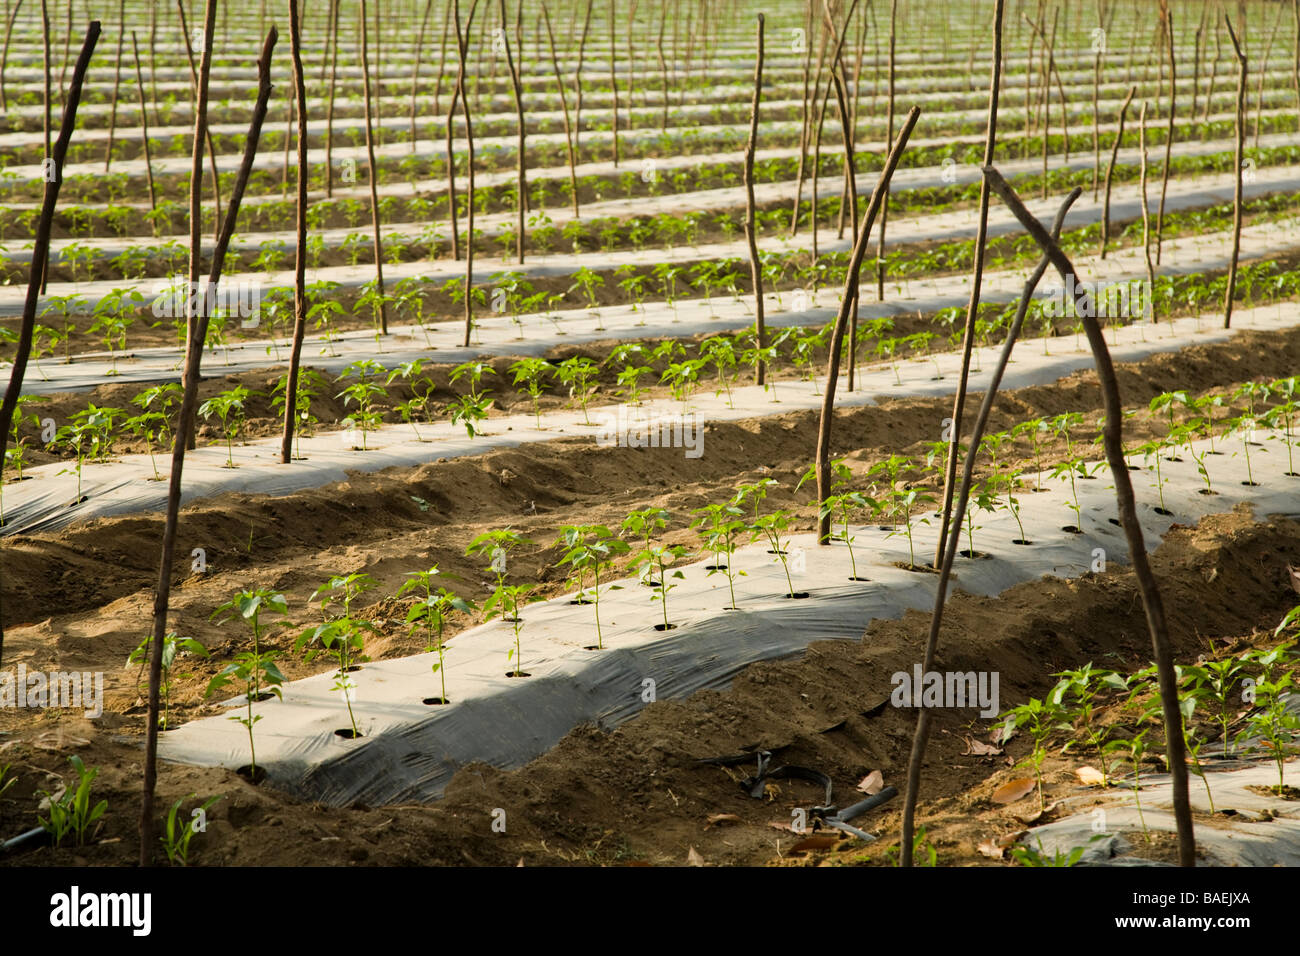 MEXICO Todos Santos Rows of pepper plant seedlings sprouting through plastic in agricultural field Stock Photo